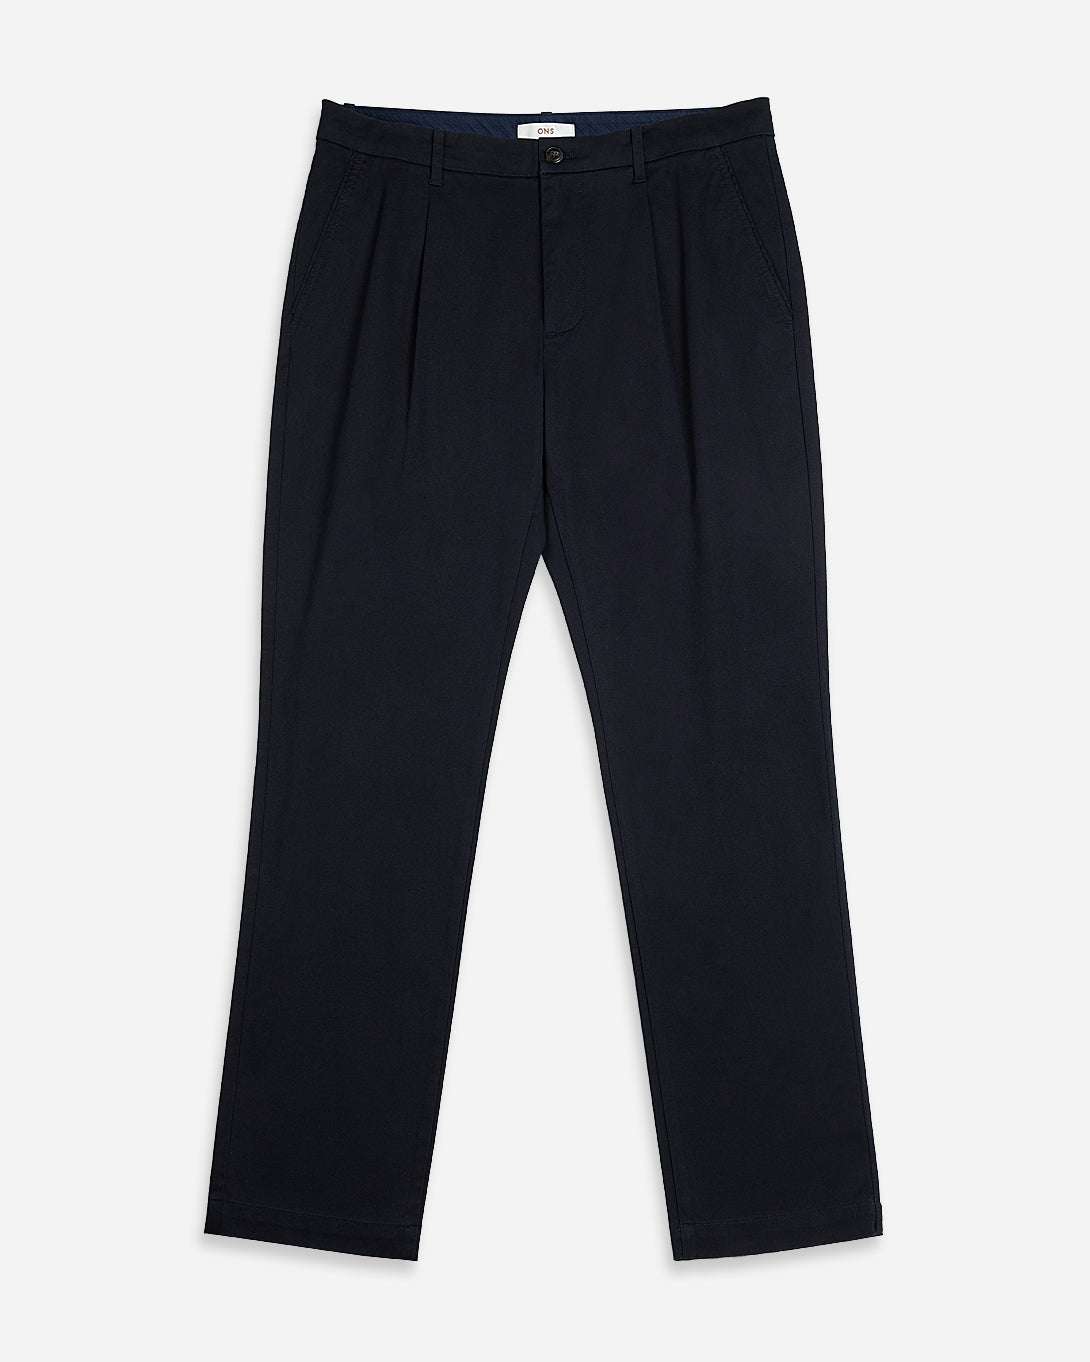 NAVY Niles Stretch Trousers Mens Pleated Relaxed Fit Comfy Stretch